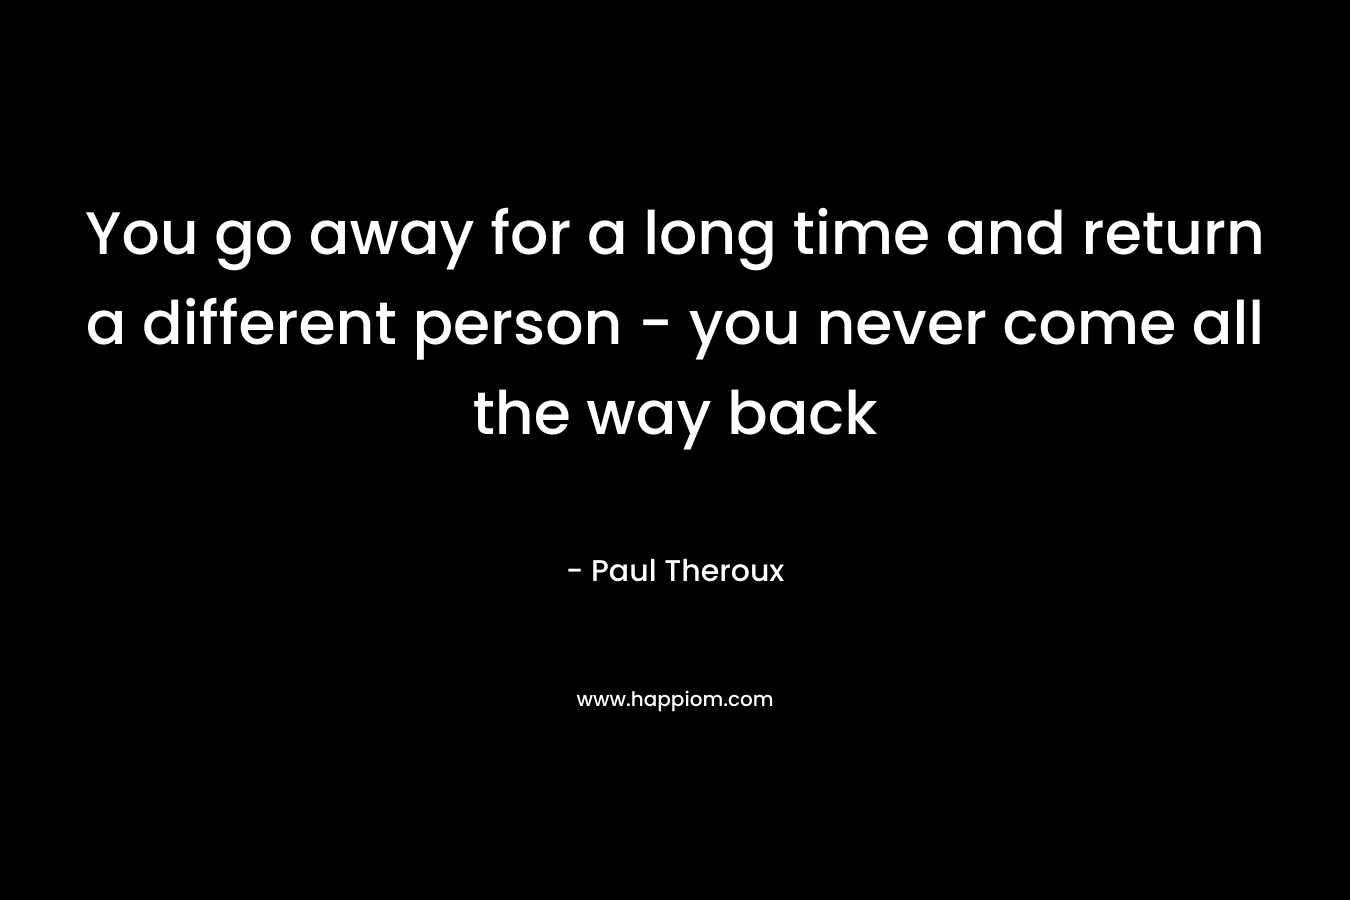 You go away for a long time and return a different person – you never come all the way back – Paul Theroux